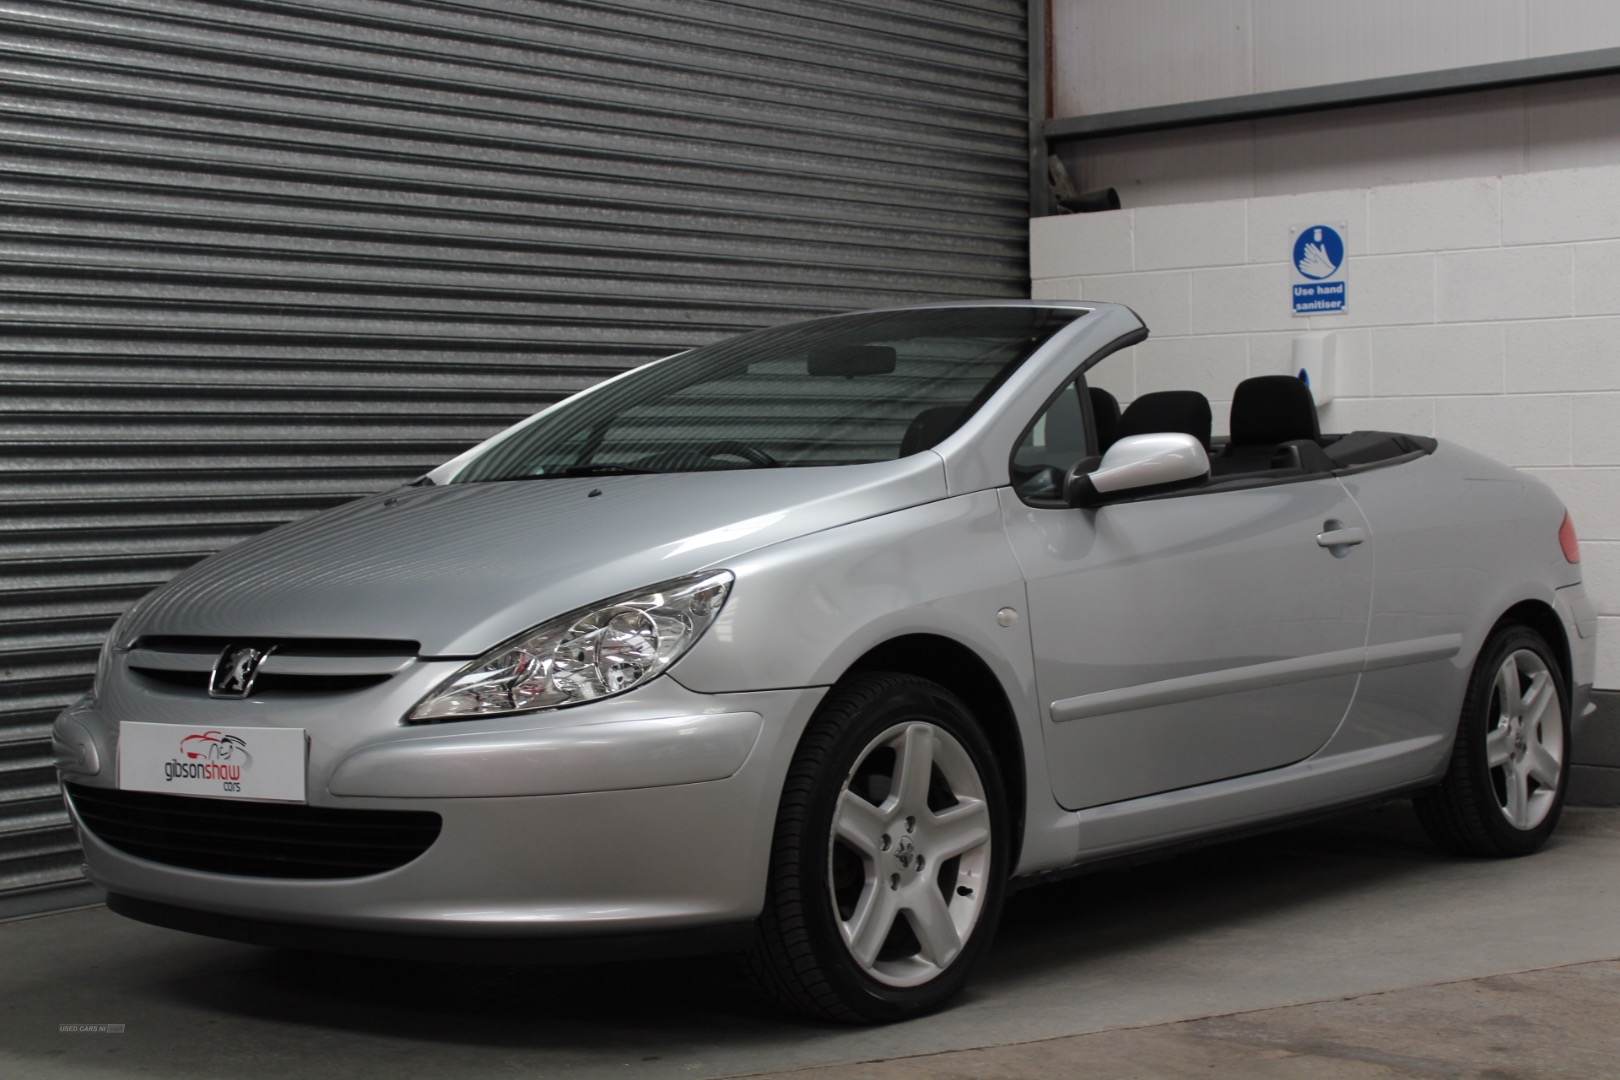 Peugeot 307 (2007) Cars For Sale in Ireland